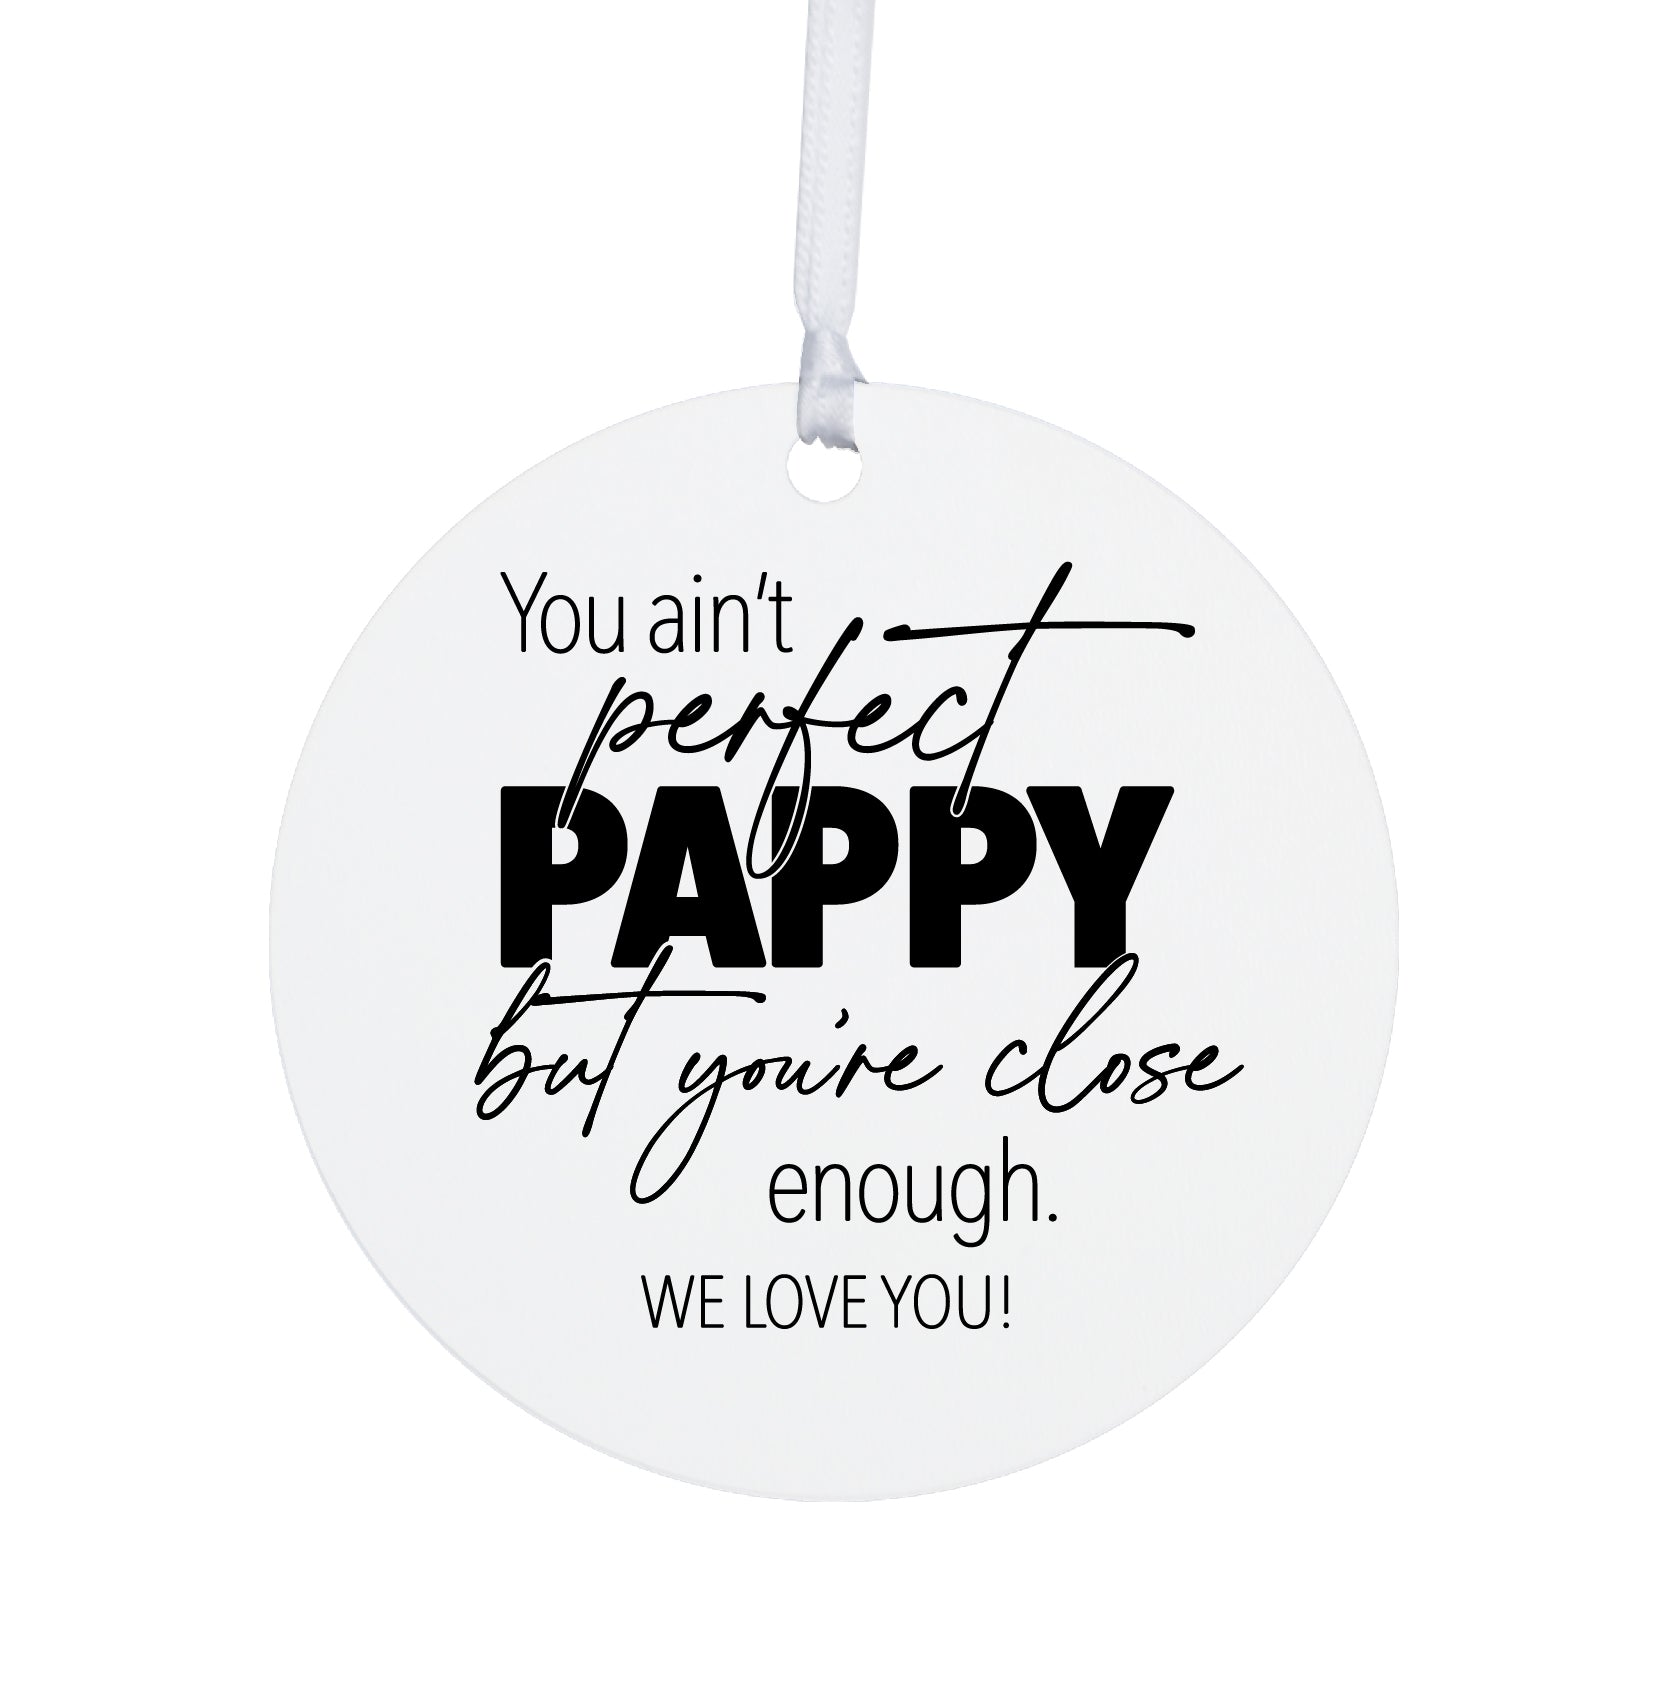 Grandparents White Ornament With Inspirational Message Gift Ideas - You Ain't Perfect Pappy